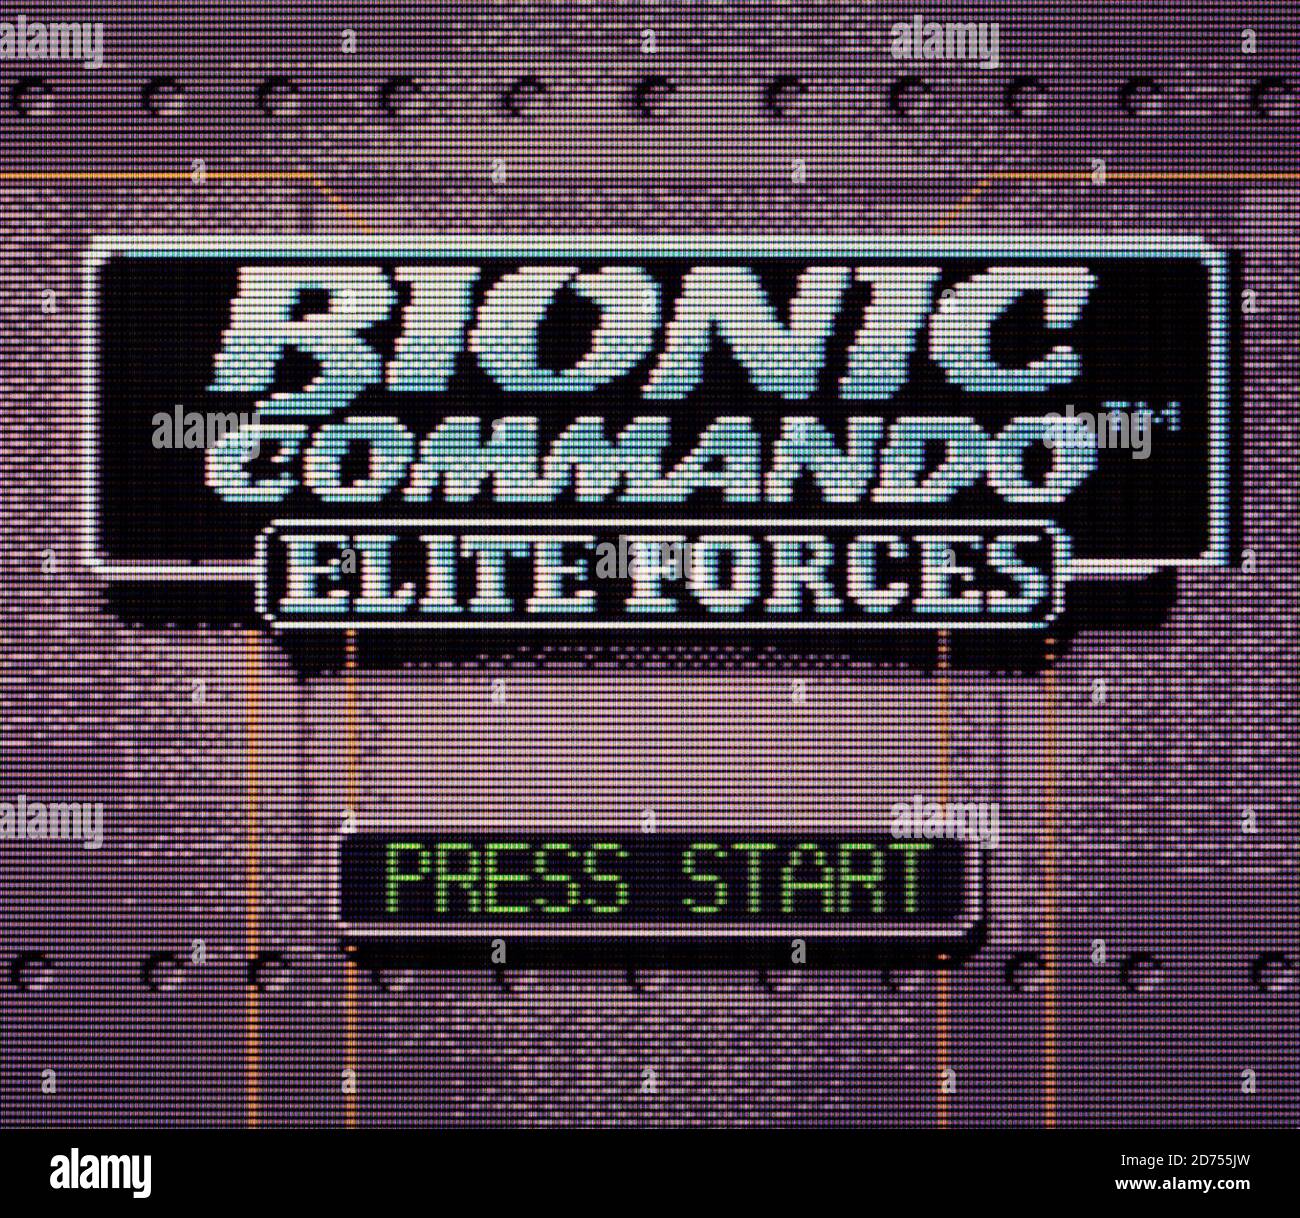 Bionic Commando - Elite Forces - Nintendo Game Boy Color Videogame - Editorial use only Stock Photo